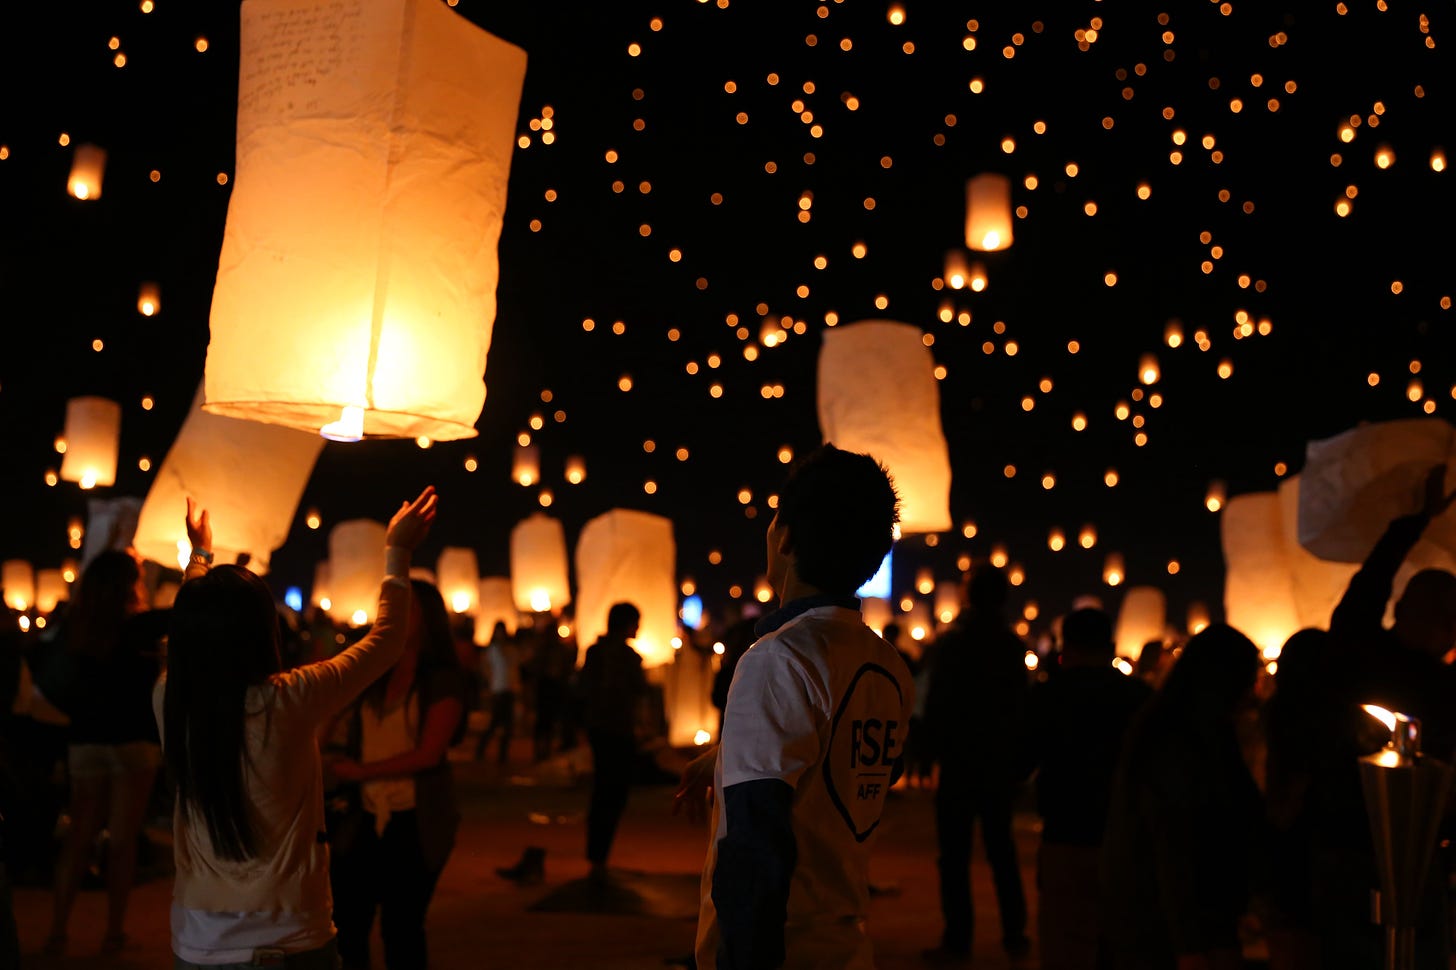 A crowd of people releasing kite lanterns into the night sky.